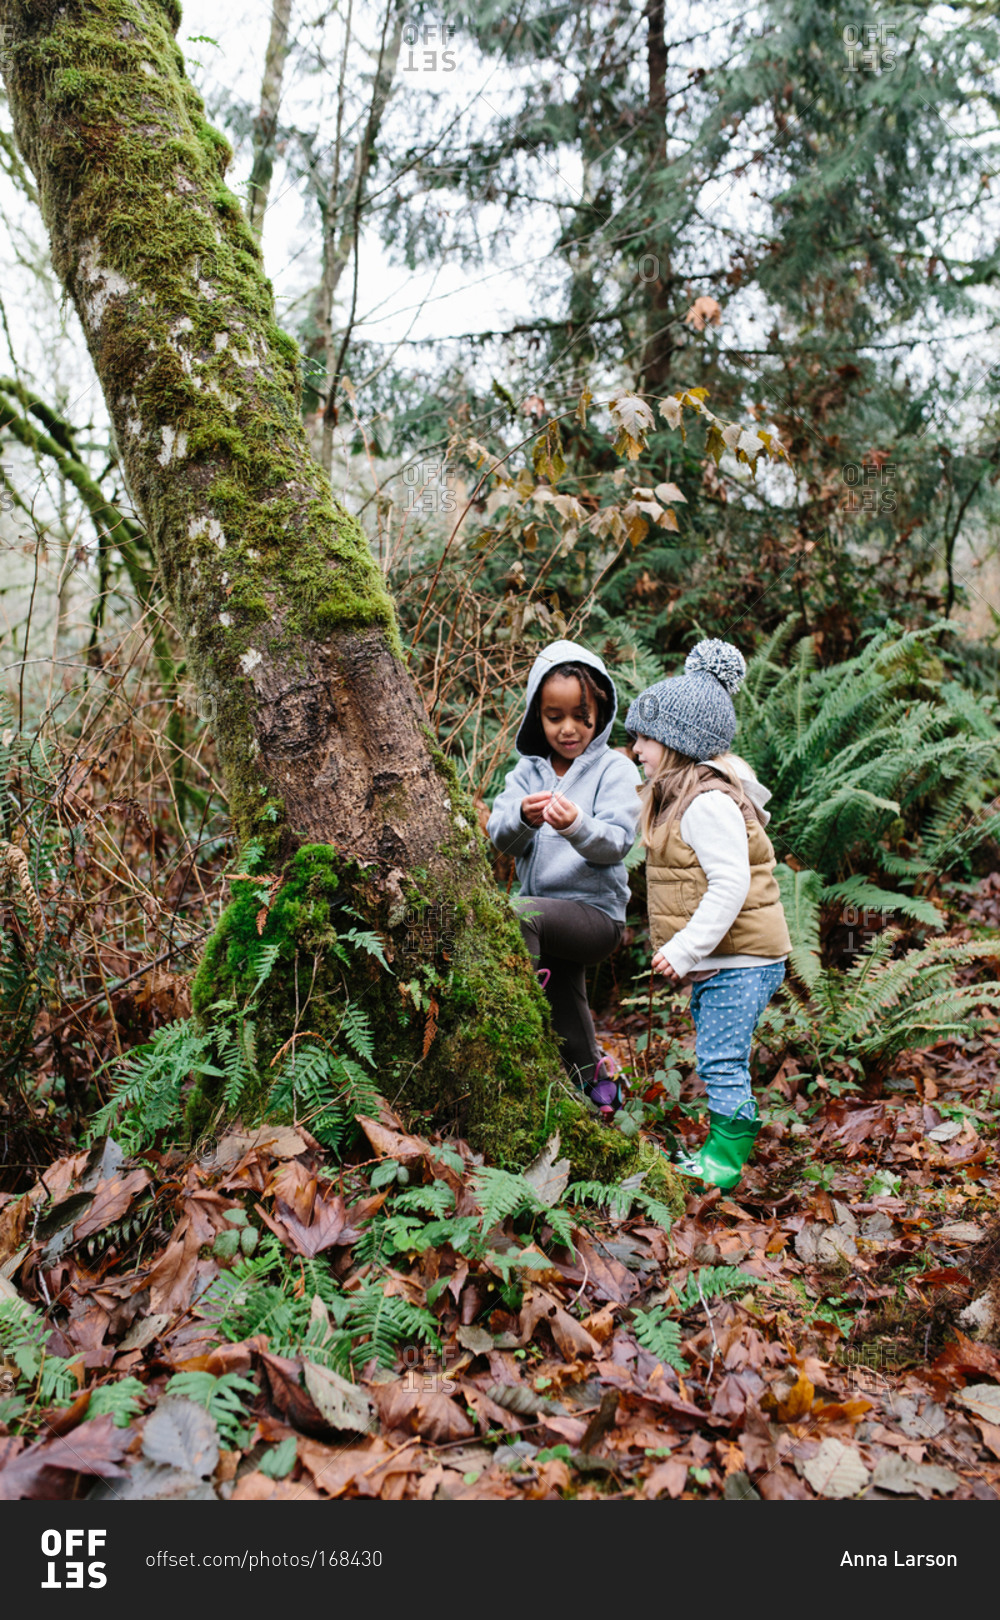 Two young girls examine a moss-covered tree in a misty forest